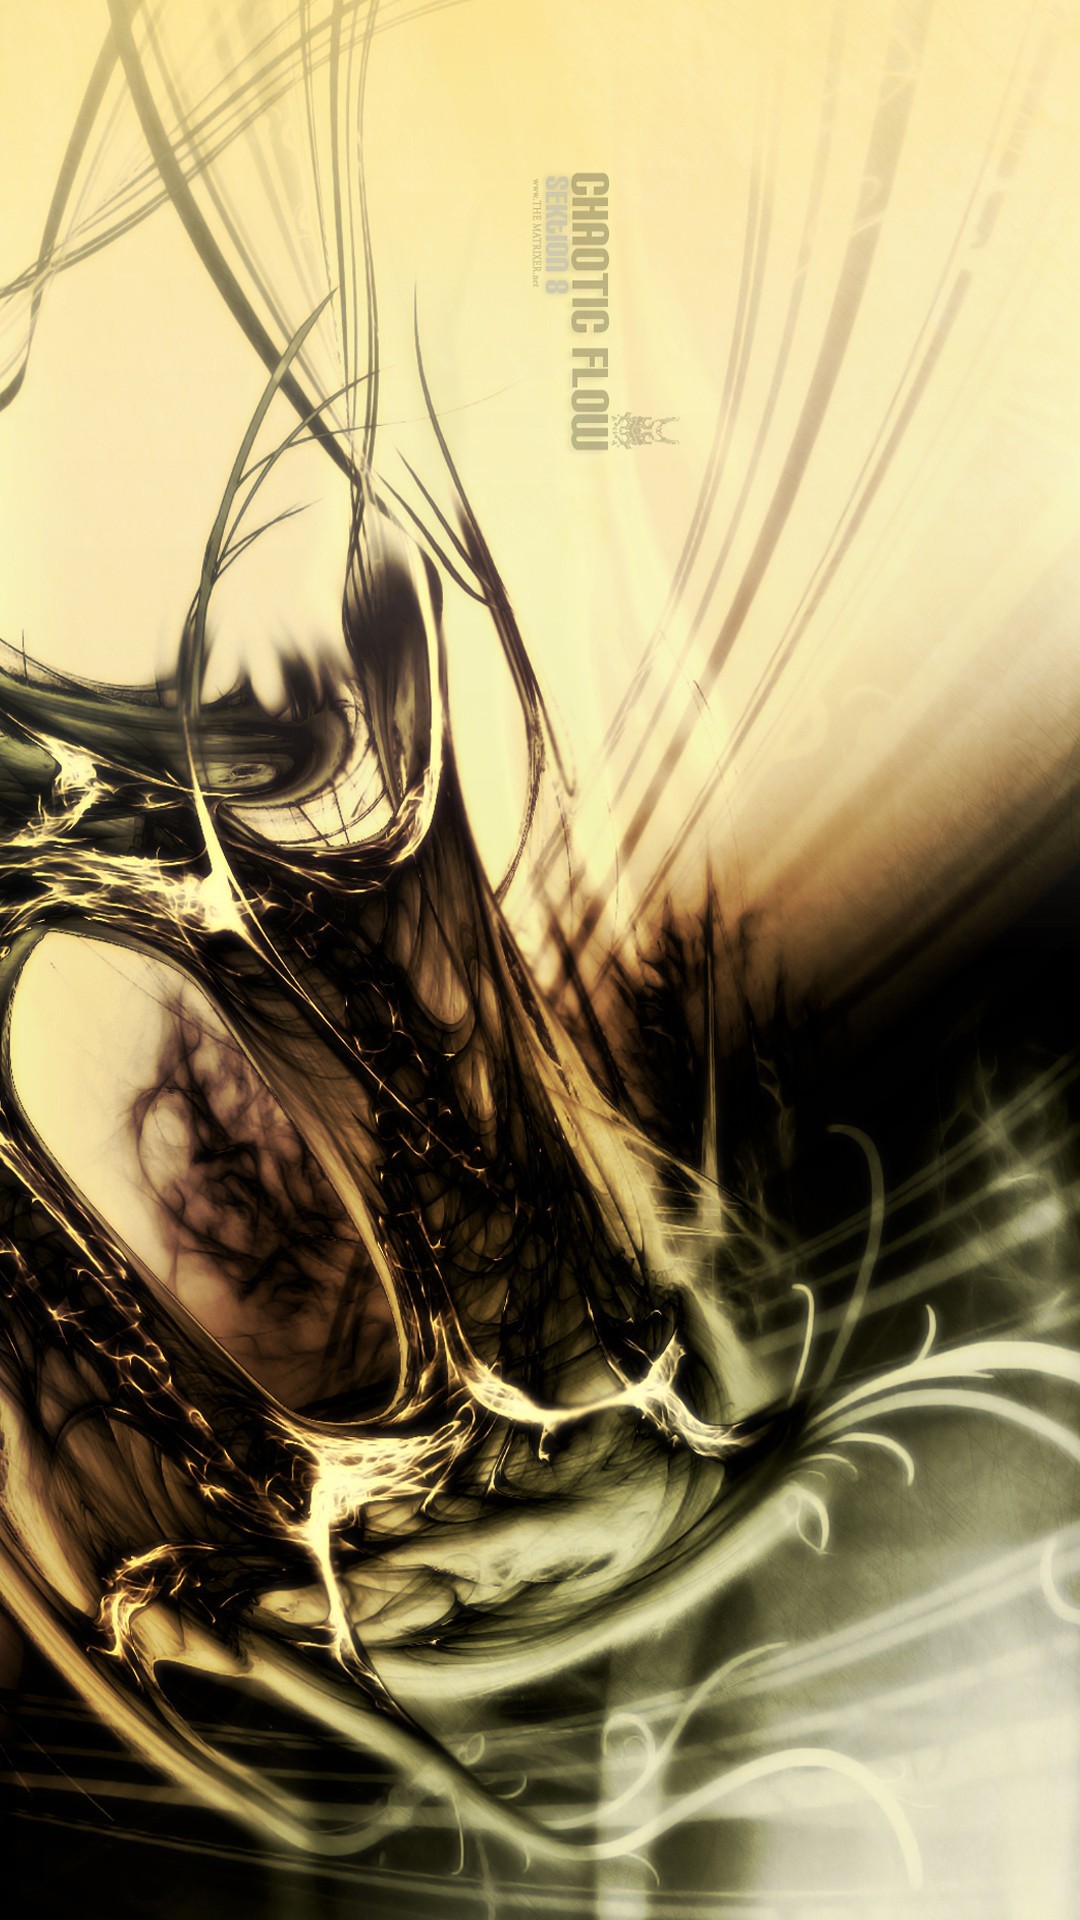 1080x1920 Champagne gold abstract iPhone wallpaper